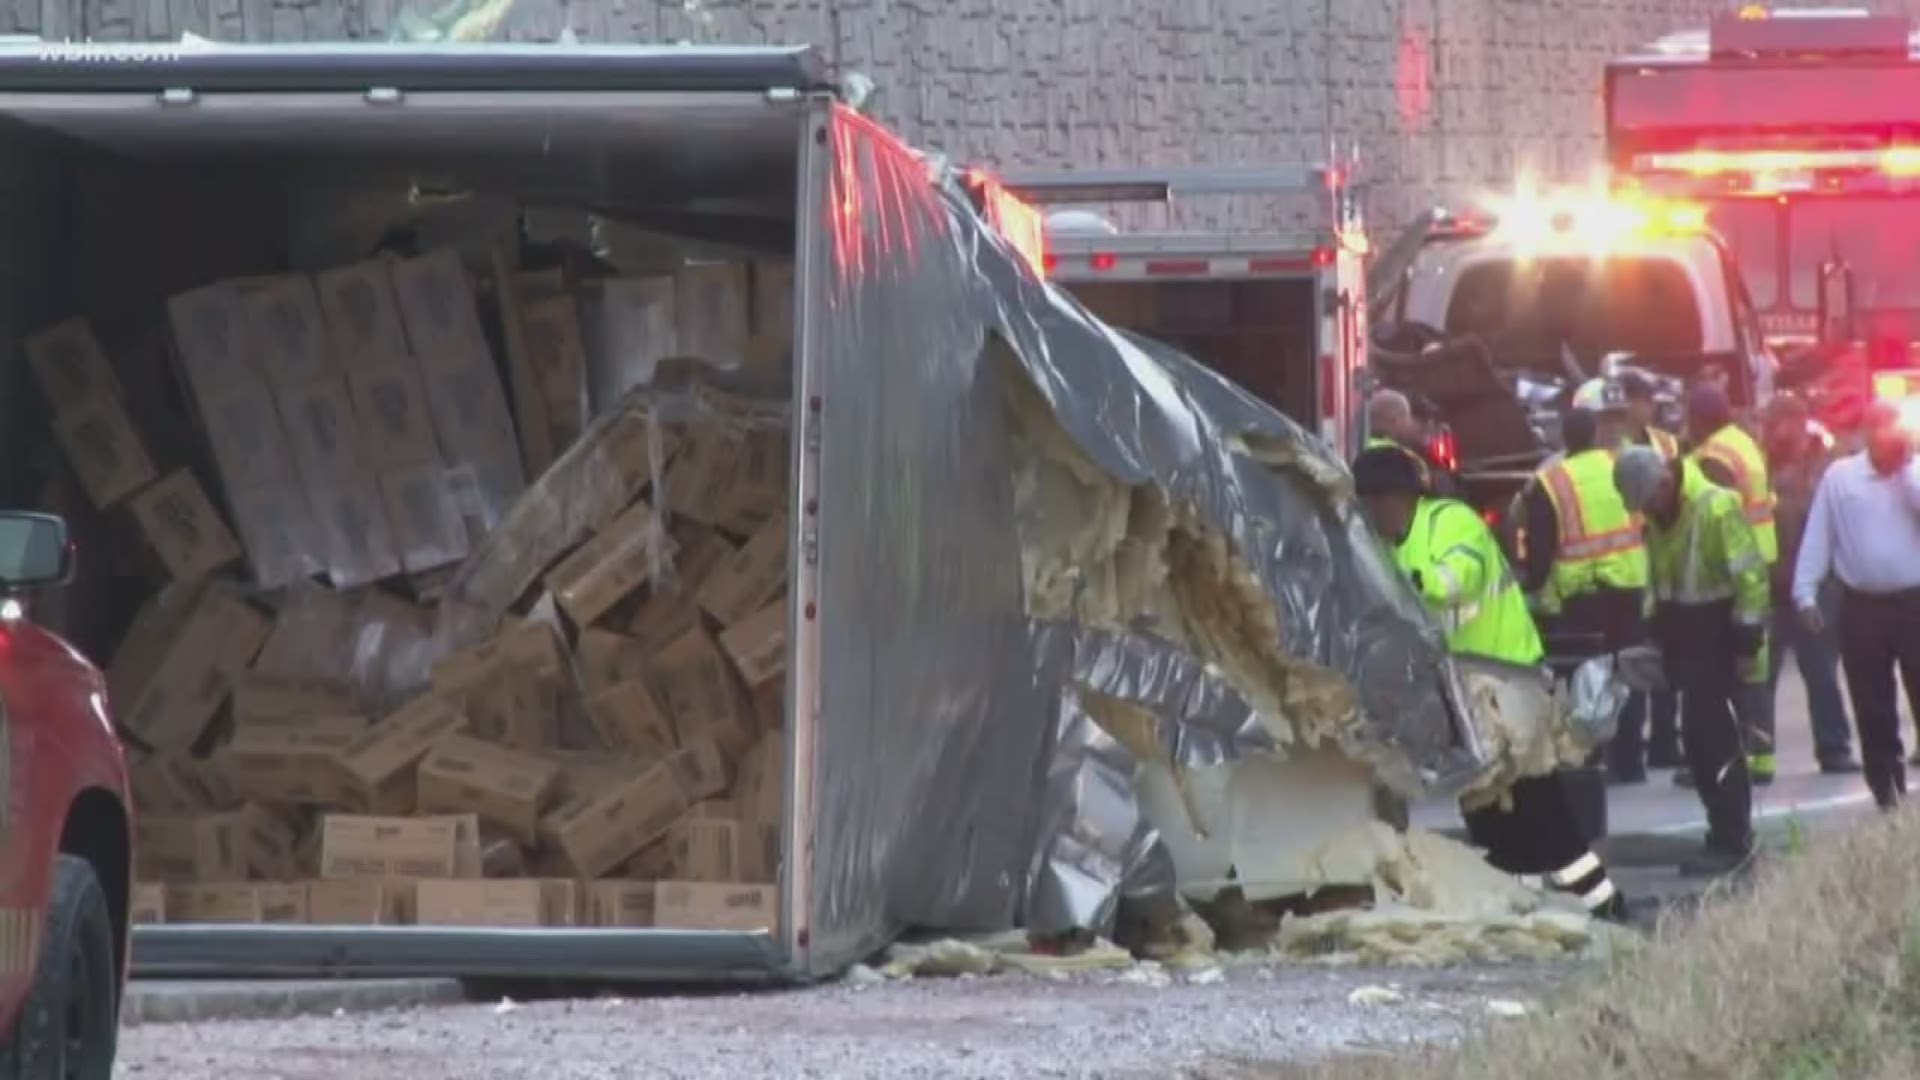 A tractor-trailer overturned on I-40 East Friday morning, blocking an off-ramp near Papermill Road.